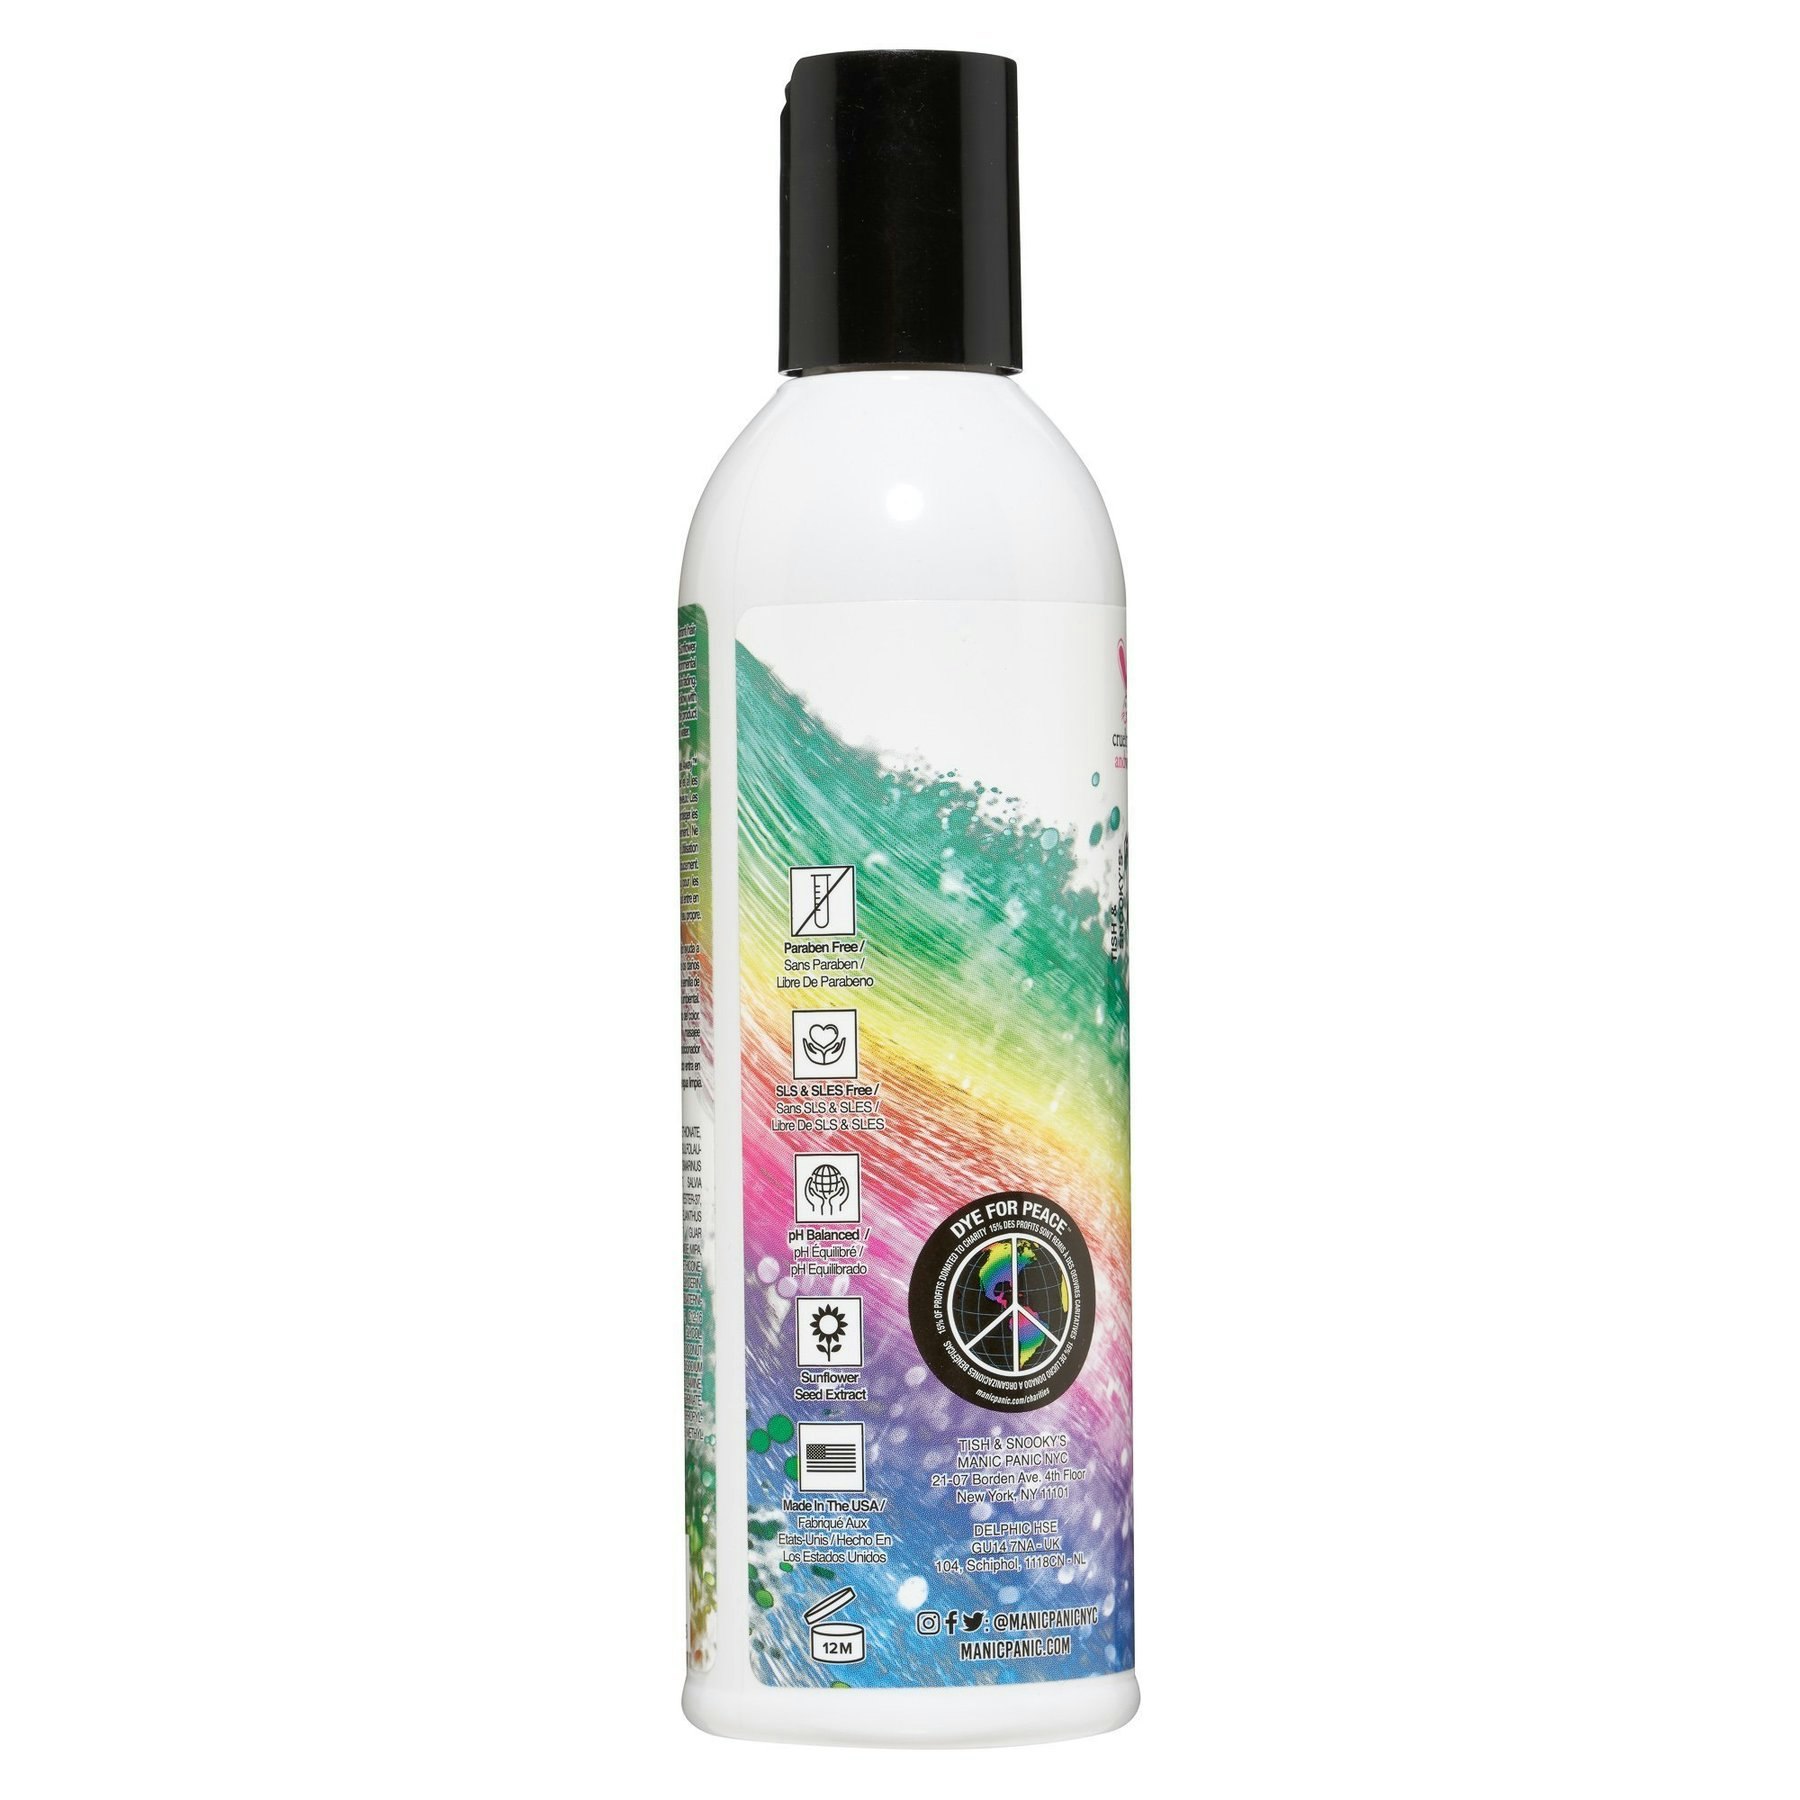 Stort Kit Prepare to dye - Not Fade away - Keep color alive 3x236ml